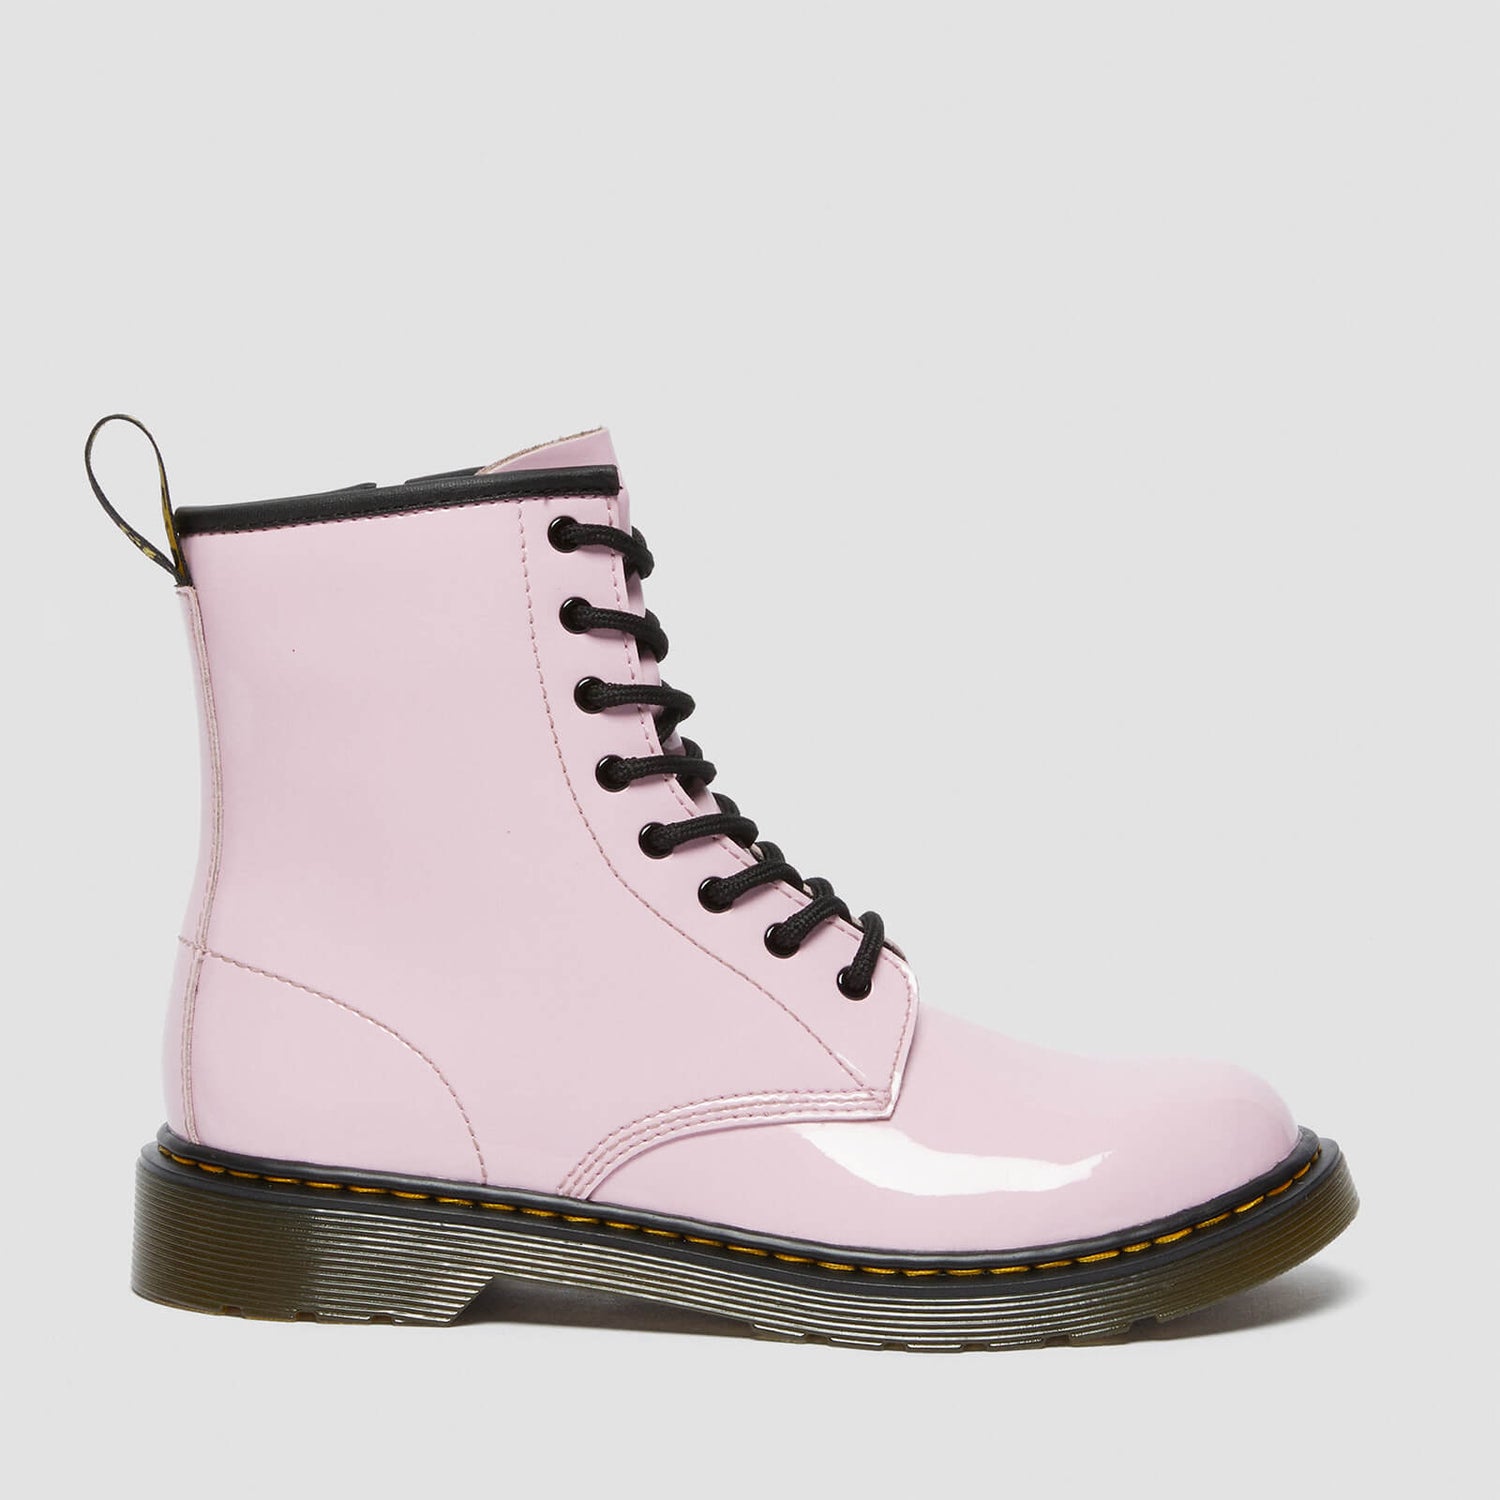 Dr. Martens Youth 1460 Patent Lamper Boots - Pale Pink - UK 4 Kids